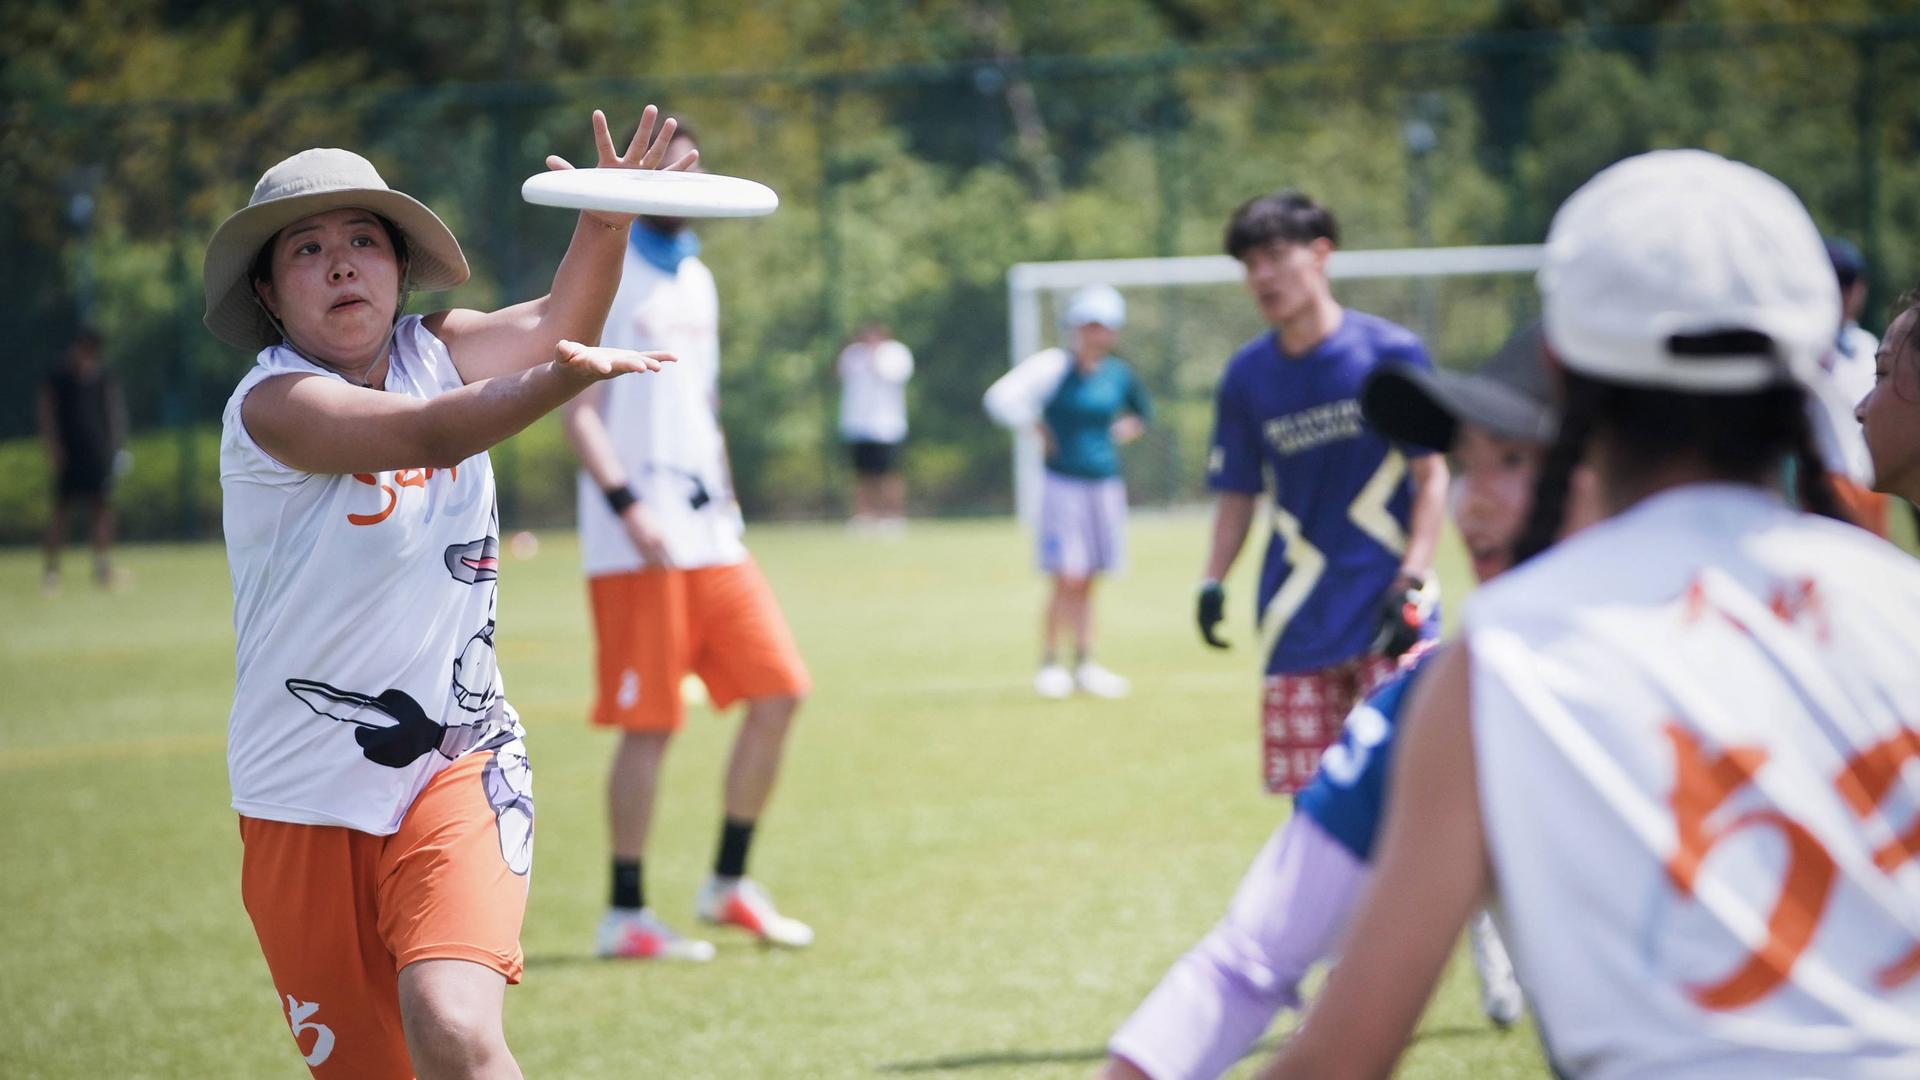 Soccer may be China’s national sport, but enthusiasm for frisbee — a quintessential American sport — is soaring in China.